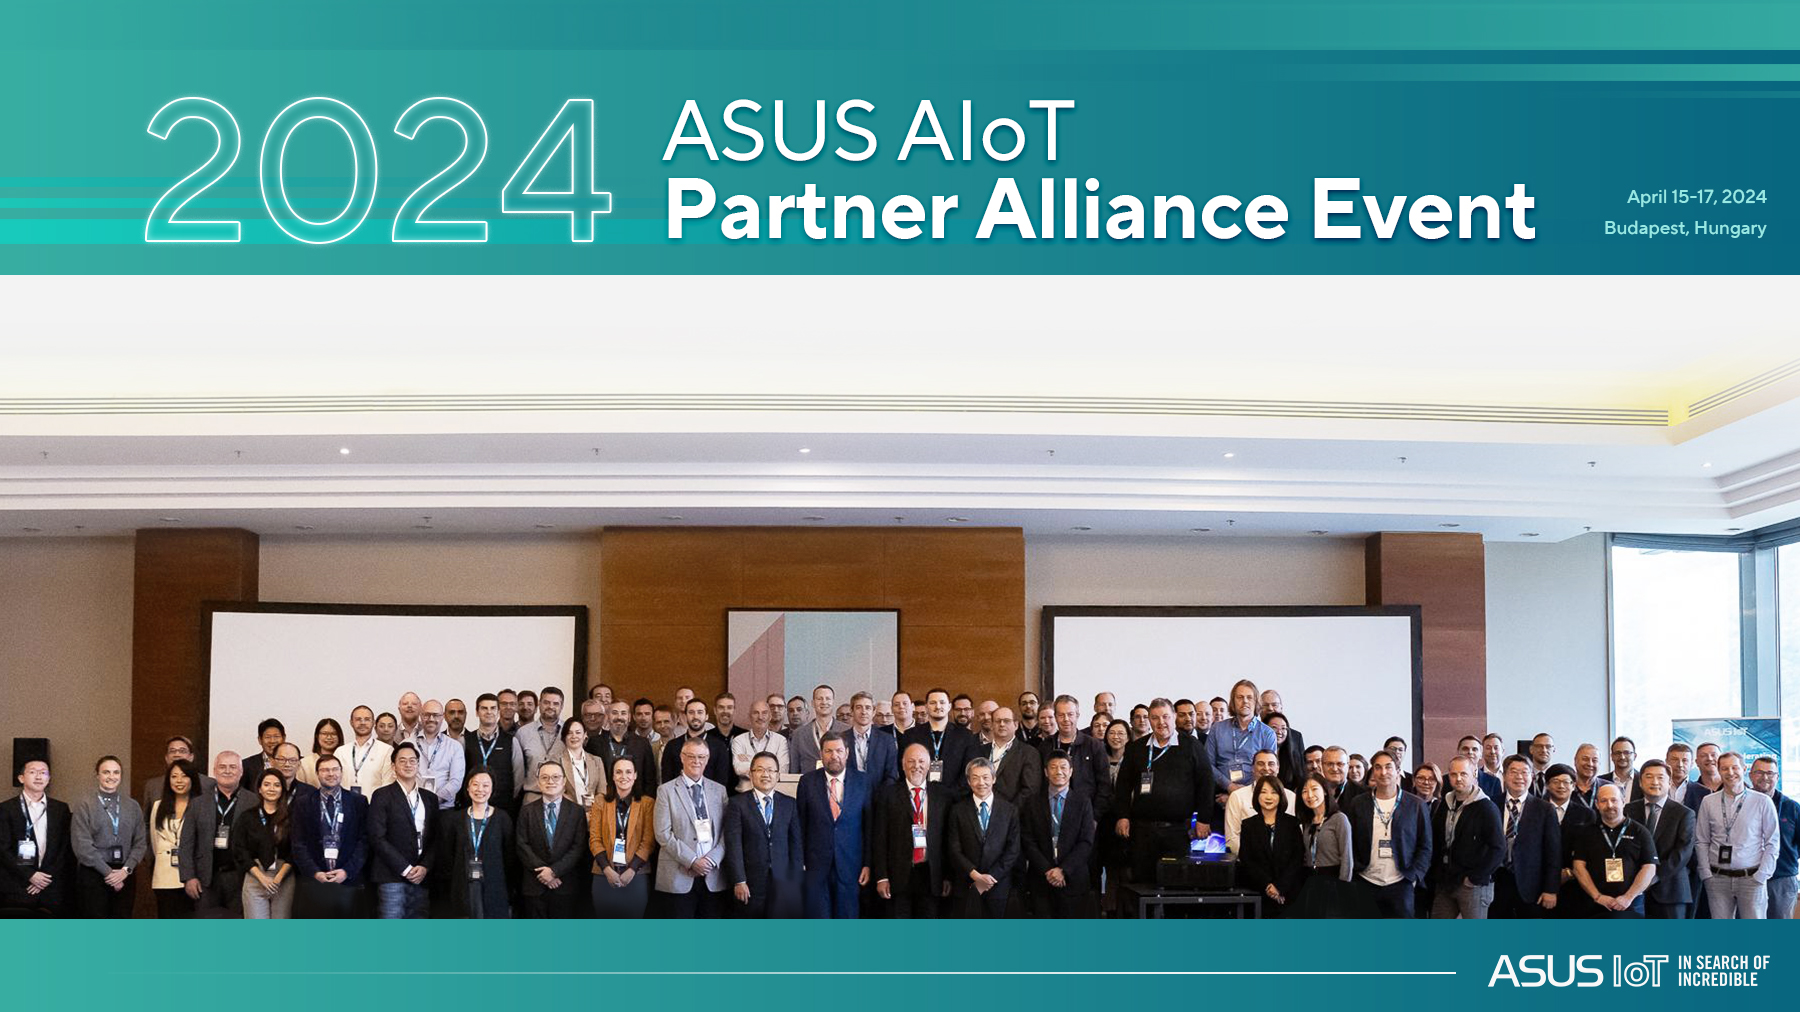 ASUS AIoT Partner Event group photo